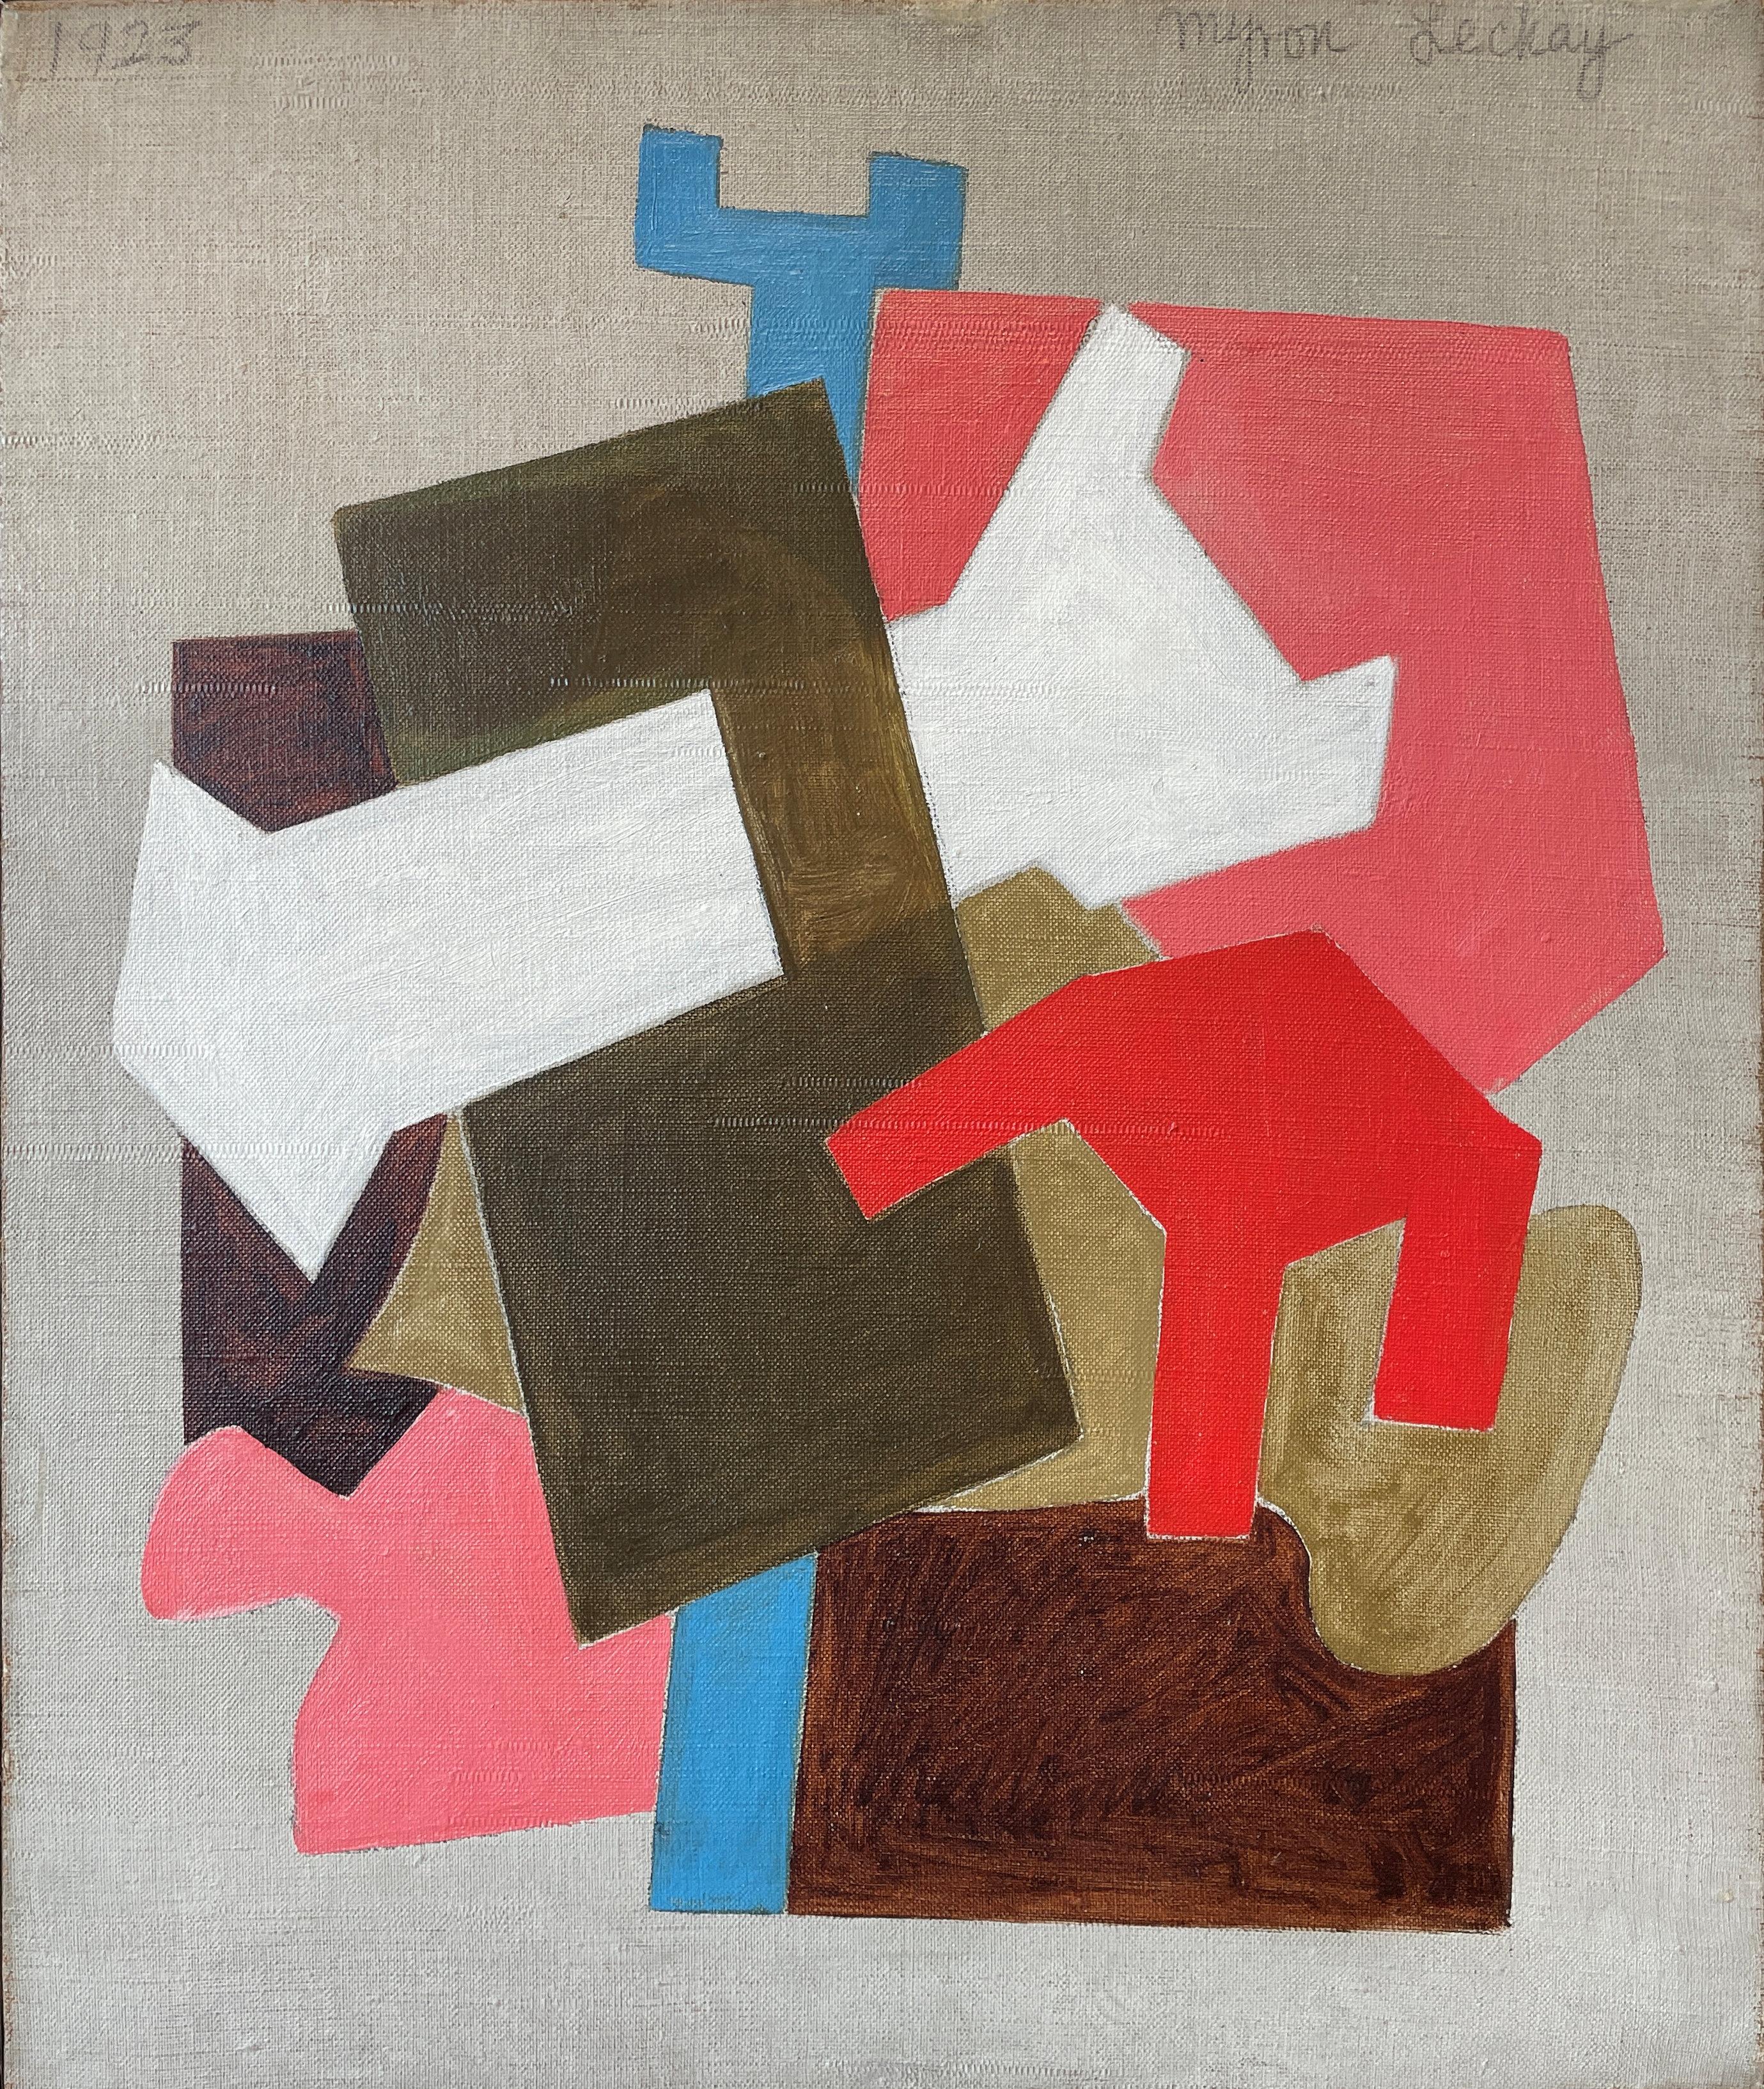 Myron Lechay
Abstract Interior of Room, 1923
Signed upper right corner and dated upper left corner
Oil on canvas
24 x 20 inches

Provenance:
Estate of the artist
Spanierman Gallery, New York

Known for his delicate colorism and graceful abstract